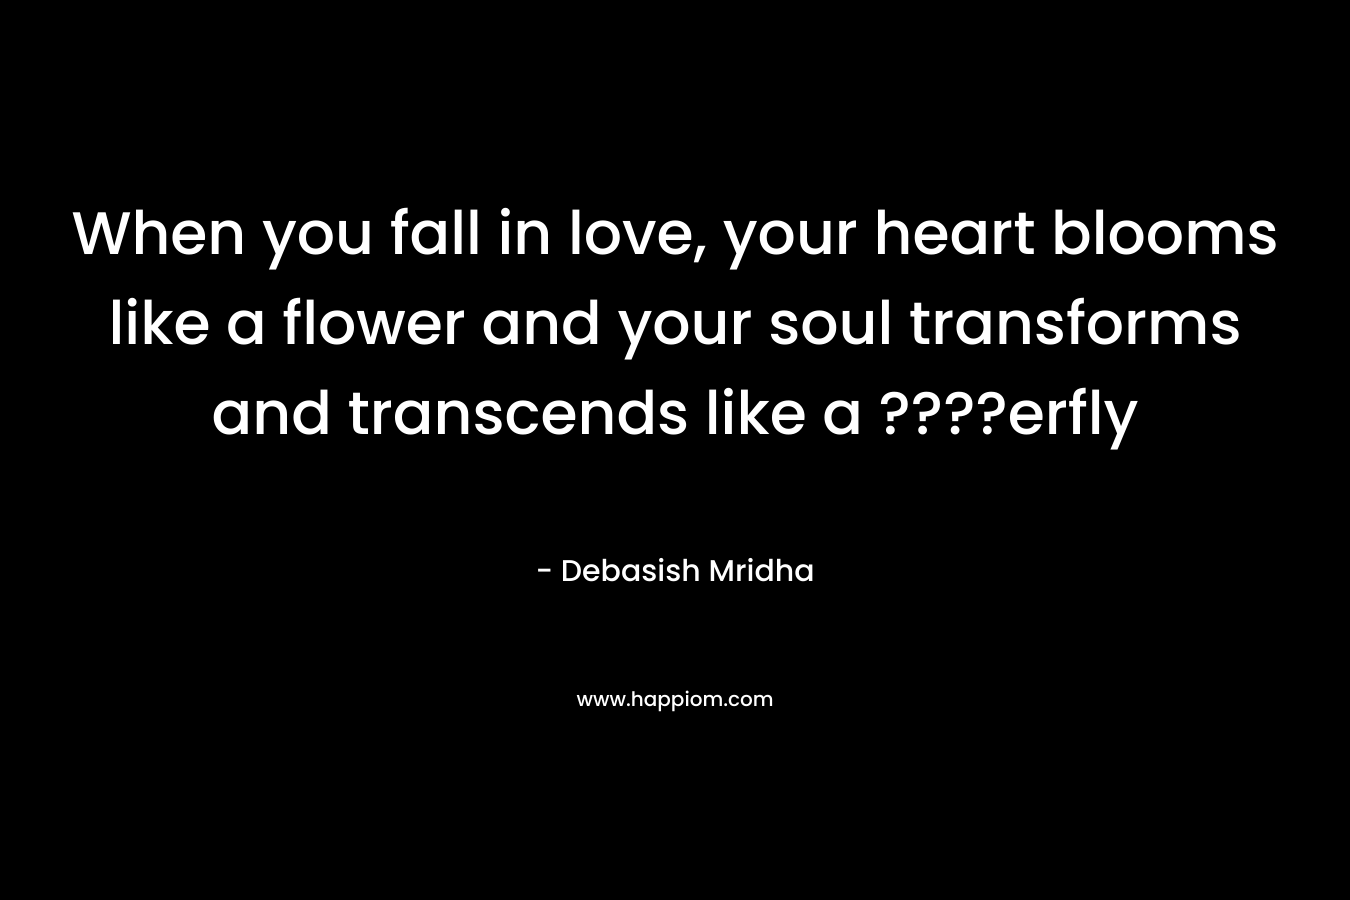 When you fall in love, your heart blooms like a flower and your soul transforms and transcends like a ????erfly